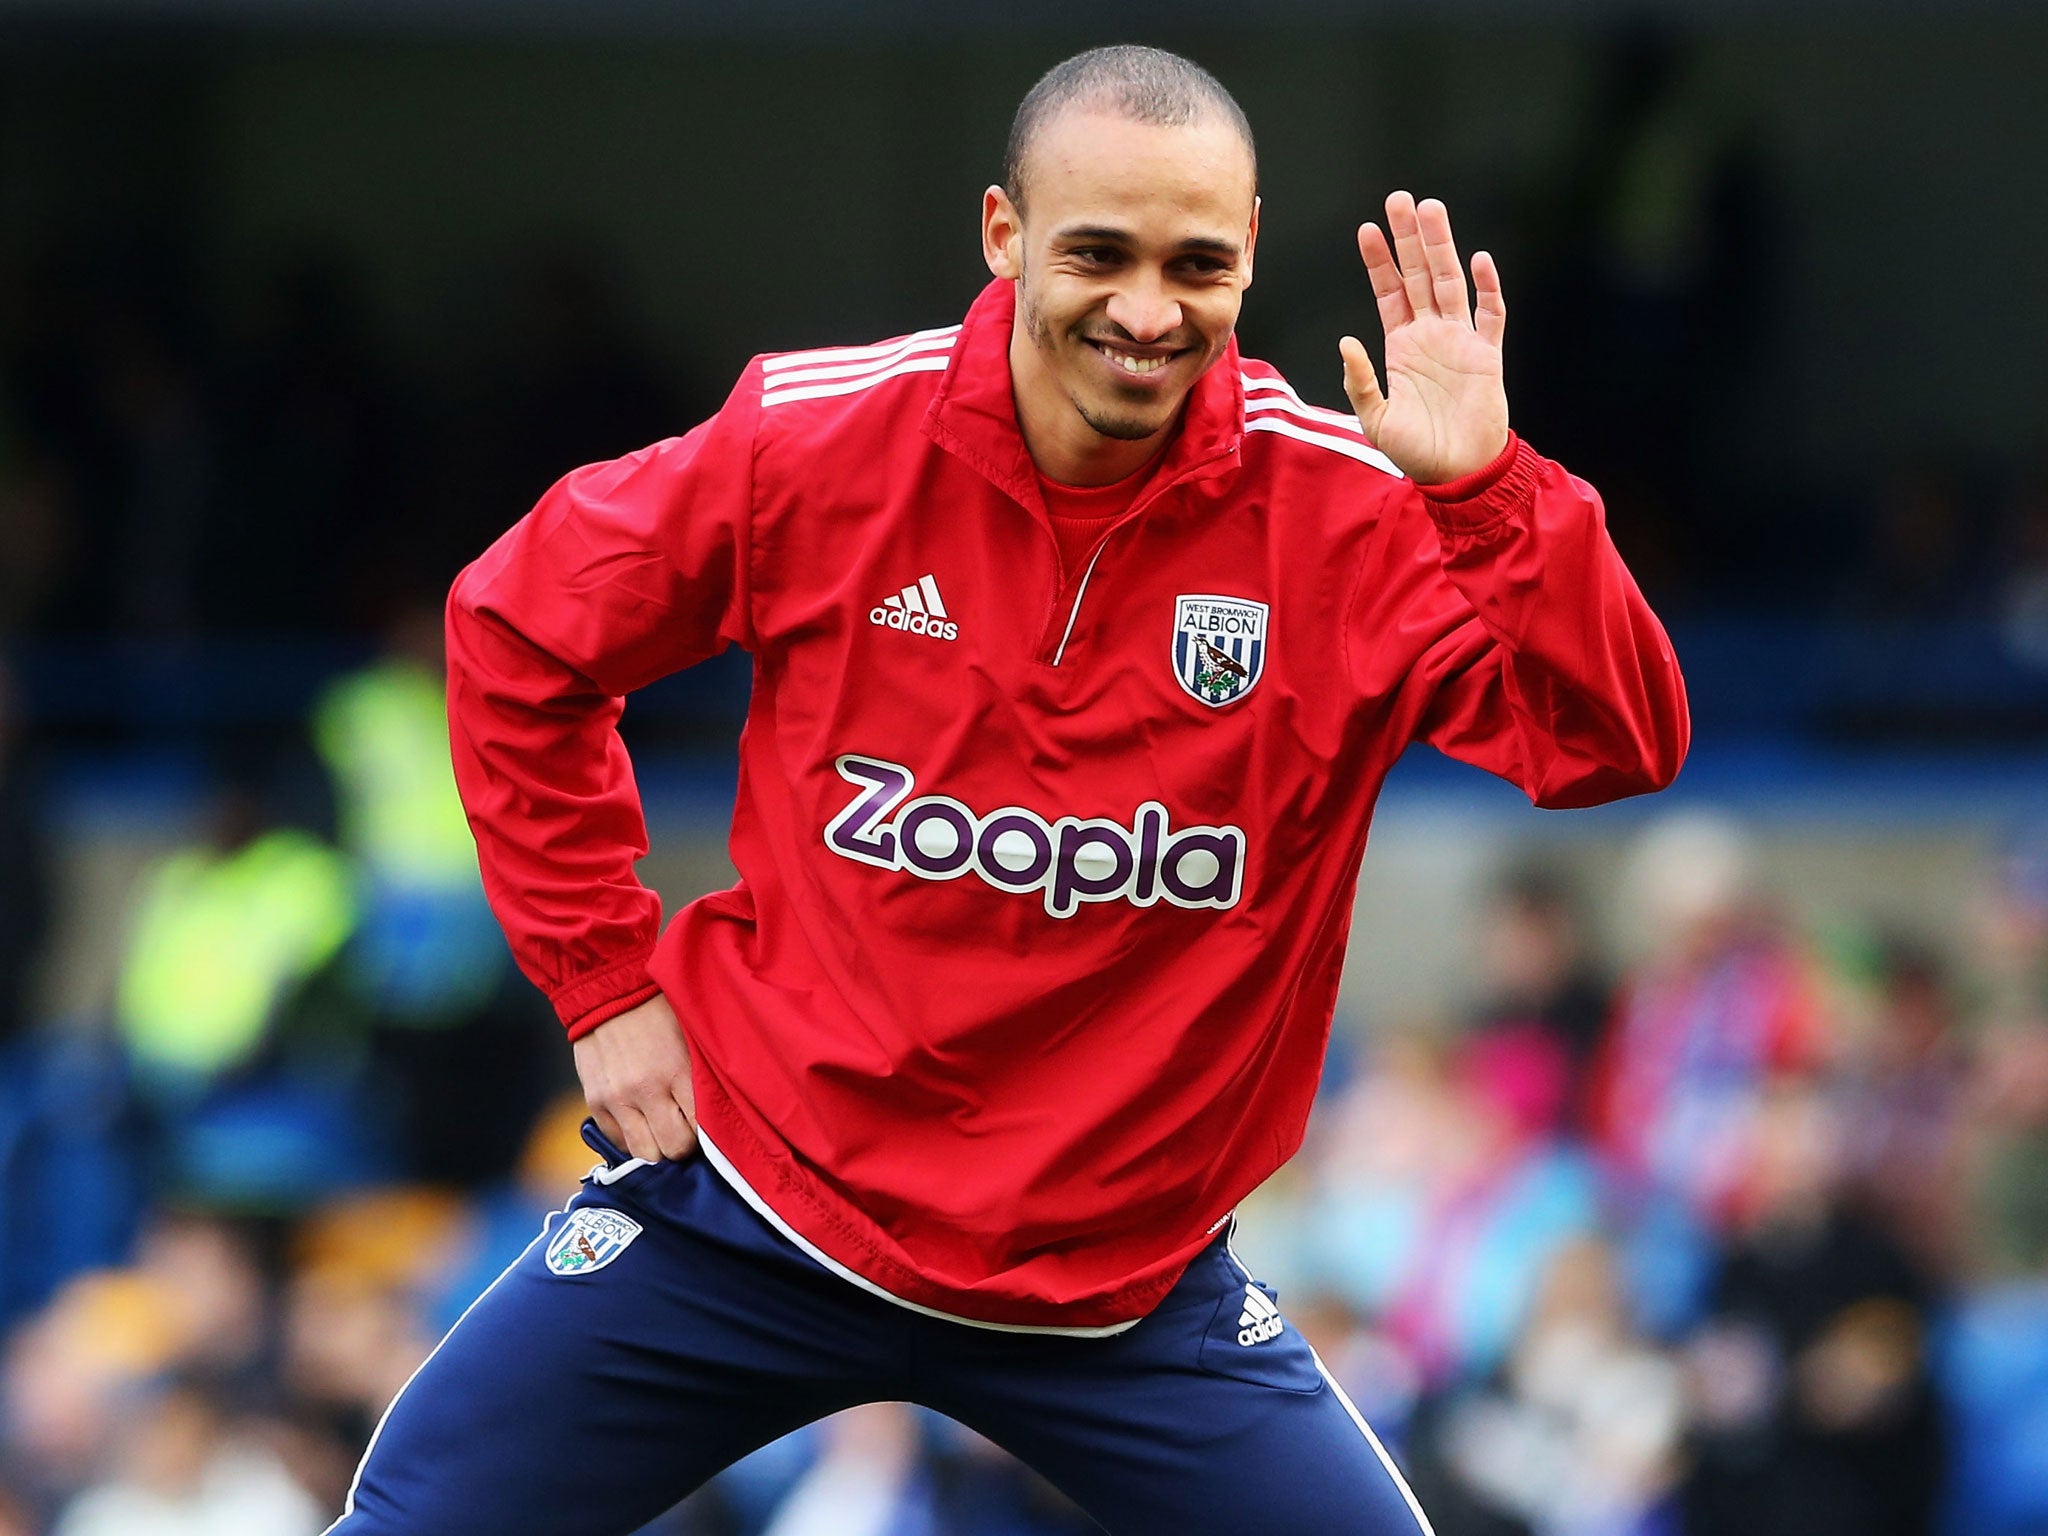 Peter Odemwingie of West Bromwich Albion waves as he warms up prior to the Barclays Premier League match between Chelsea and West Bromwich Albion